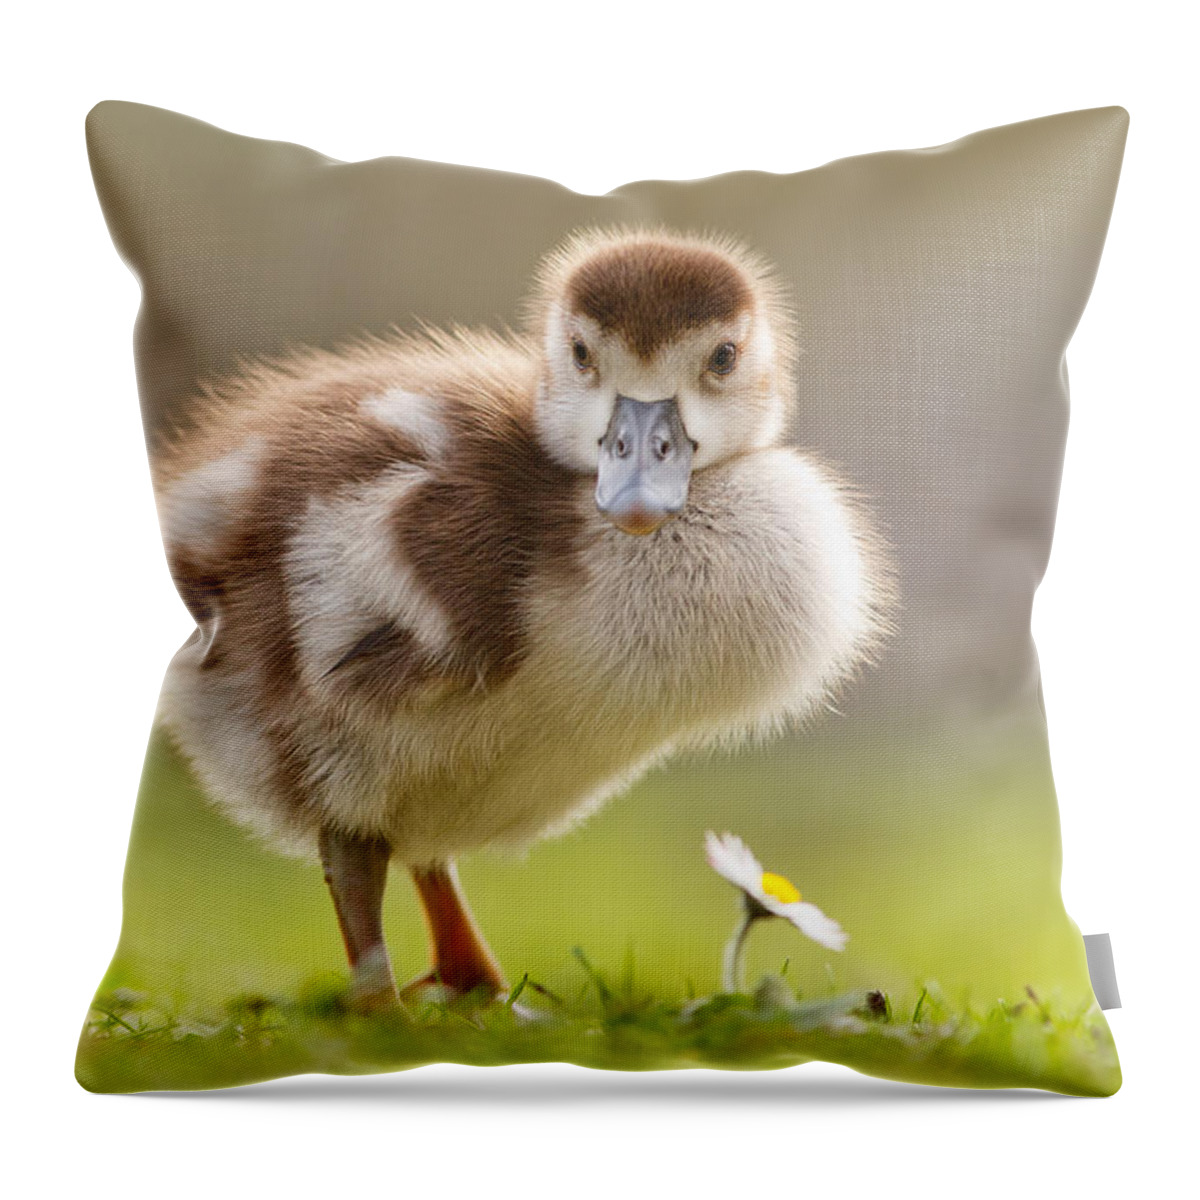 Gosling Throw Pillow featuring the photograph The Gosling and the Flower by Roeselien Raimond